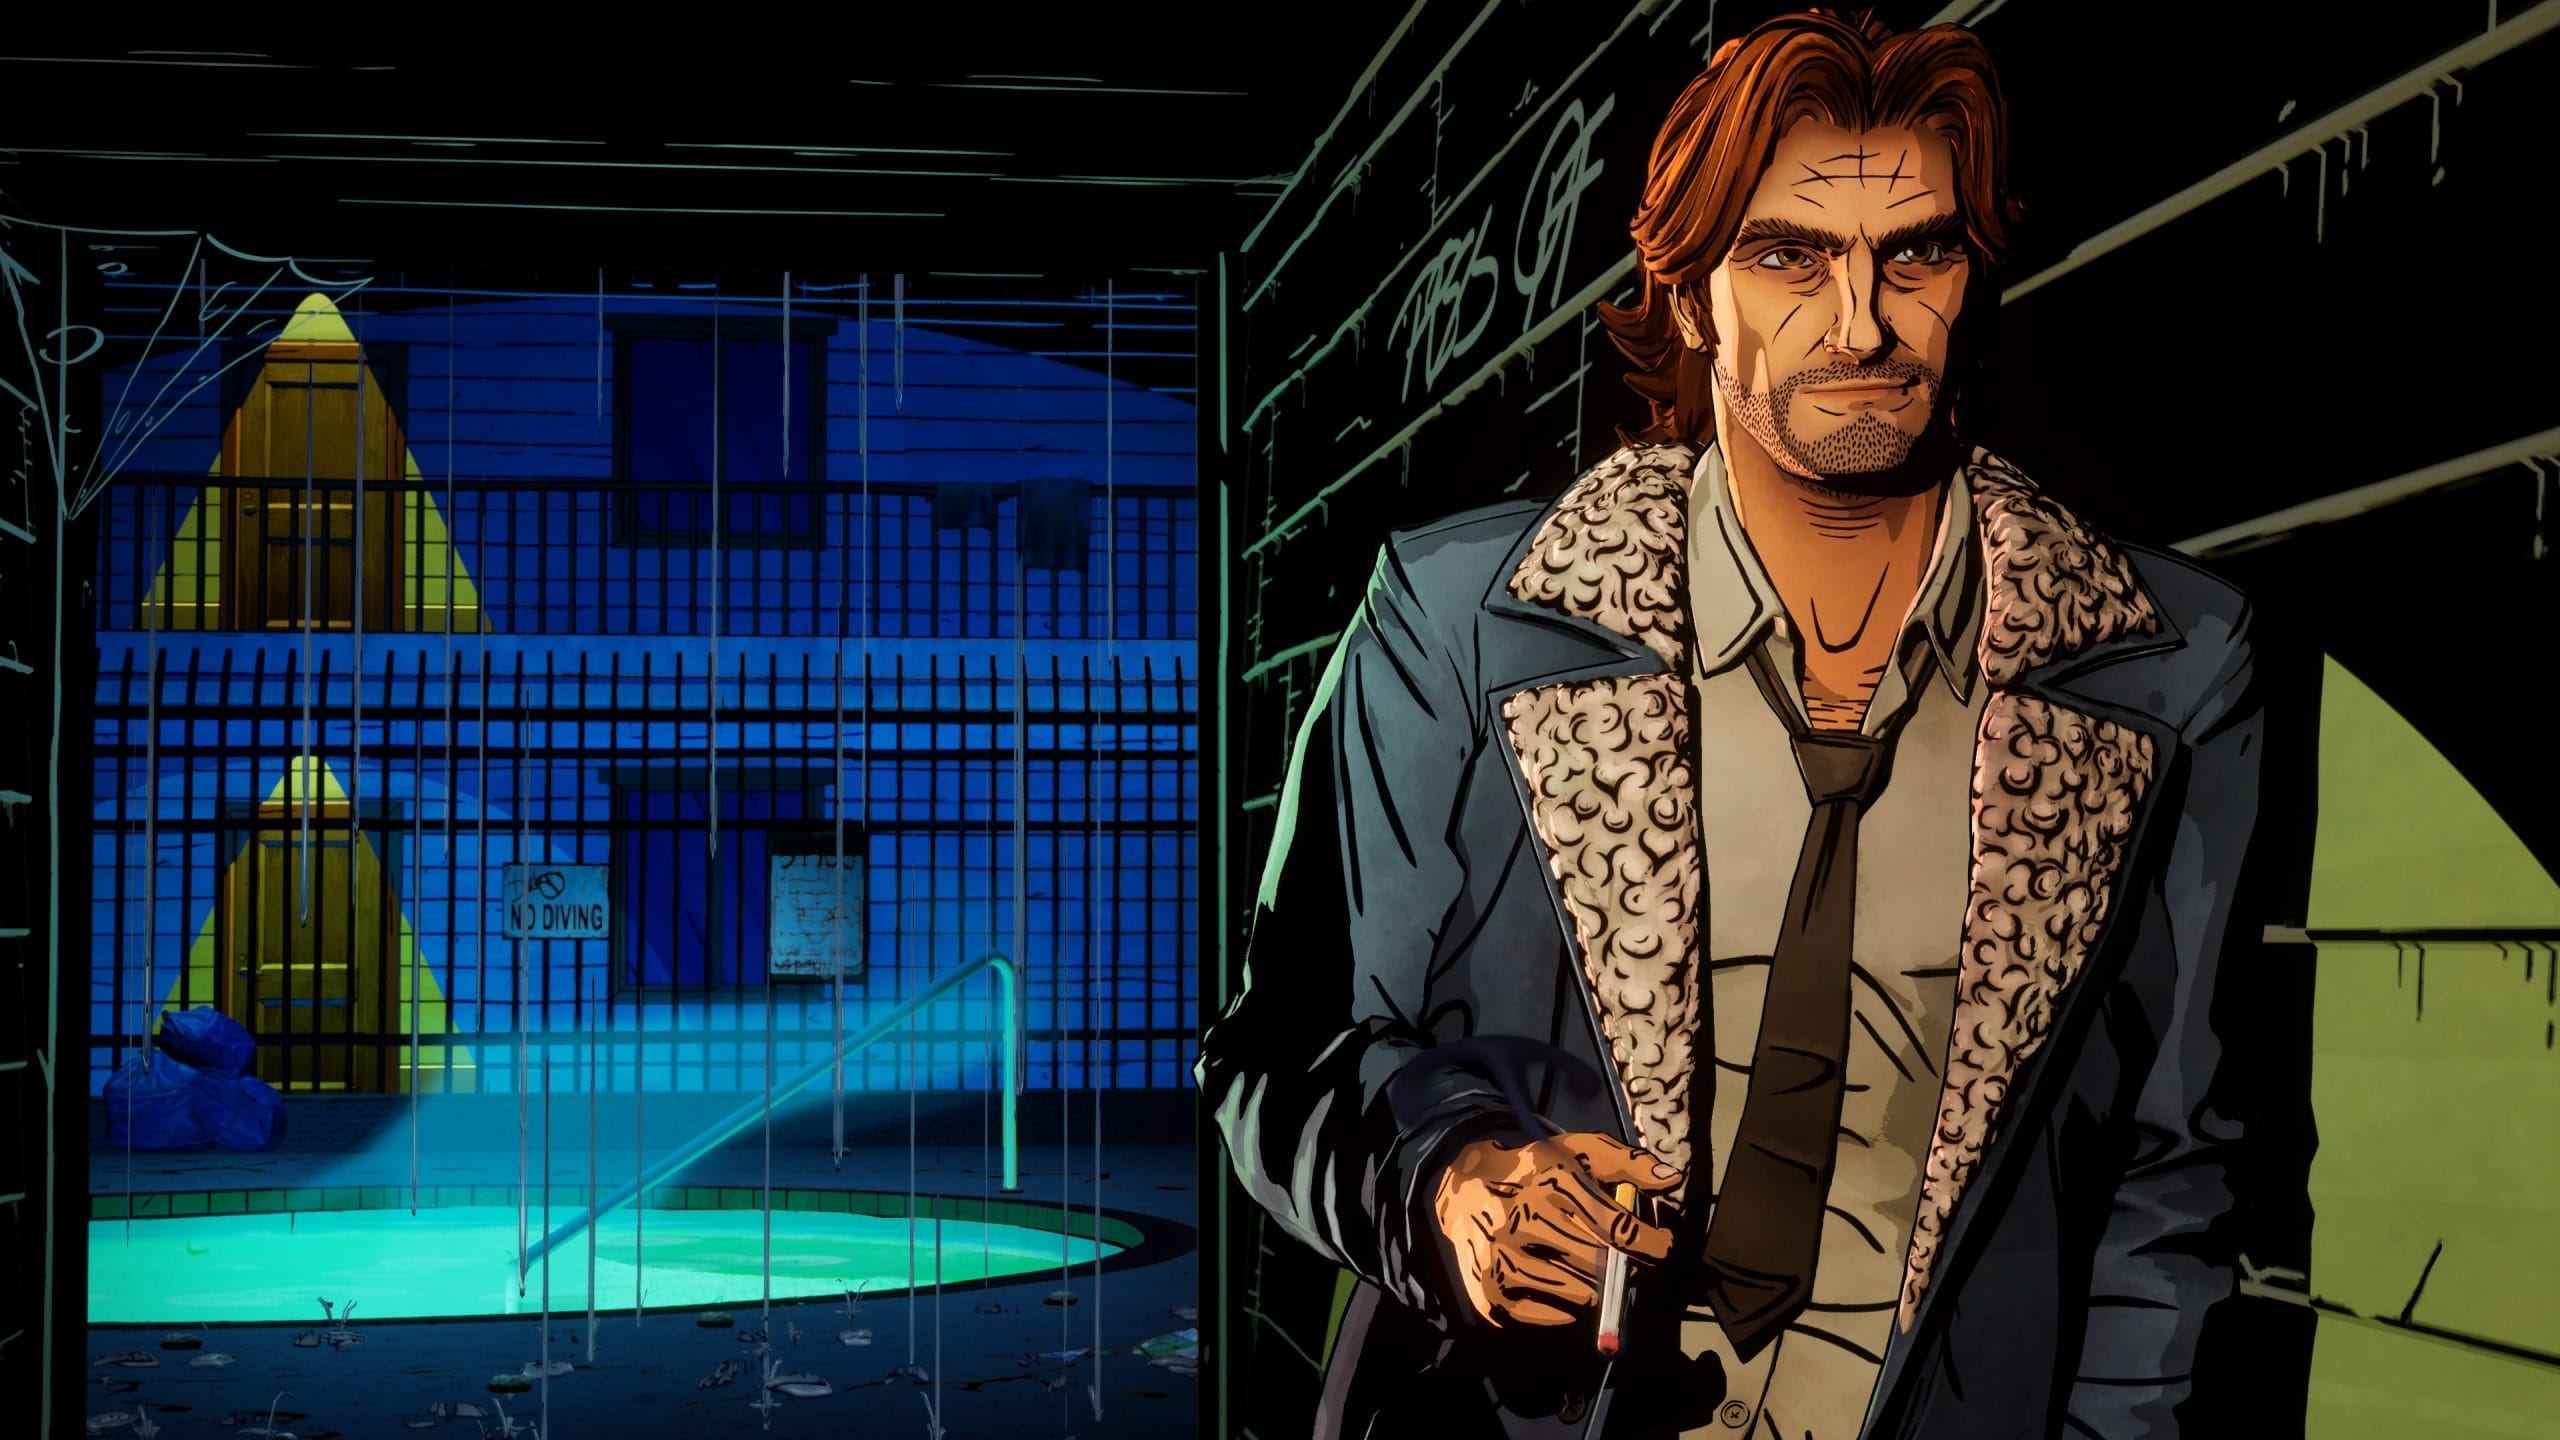 Telltale Games says The Wolf Among Us 2 isn't dead and releases new in-game screenshots as proof